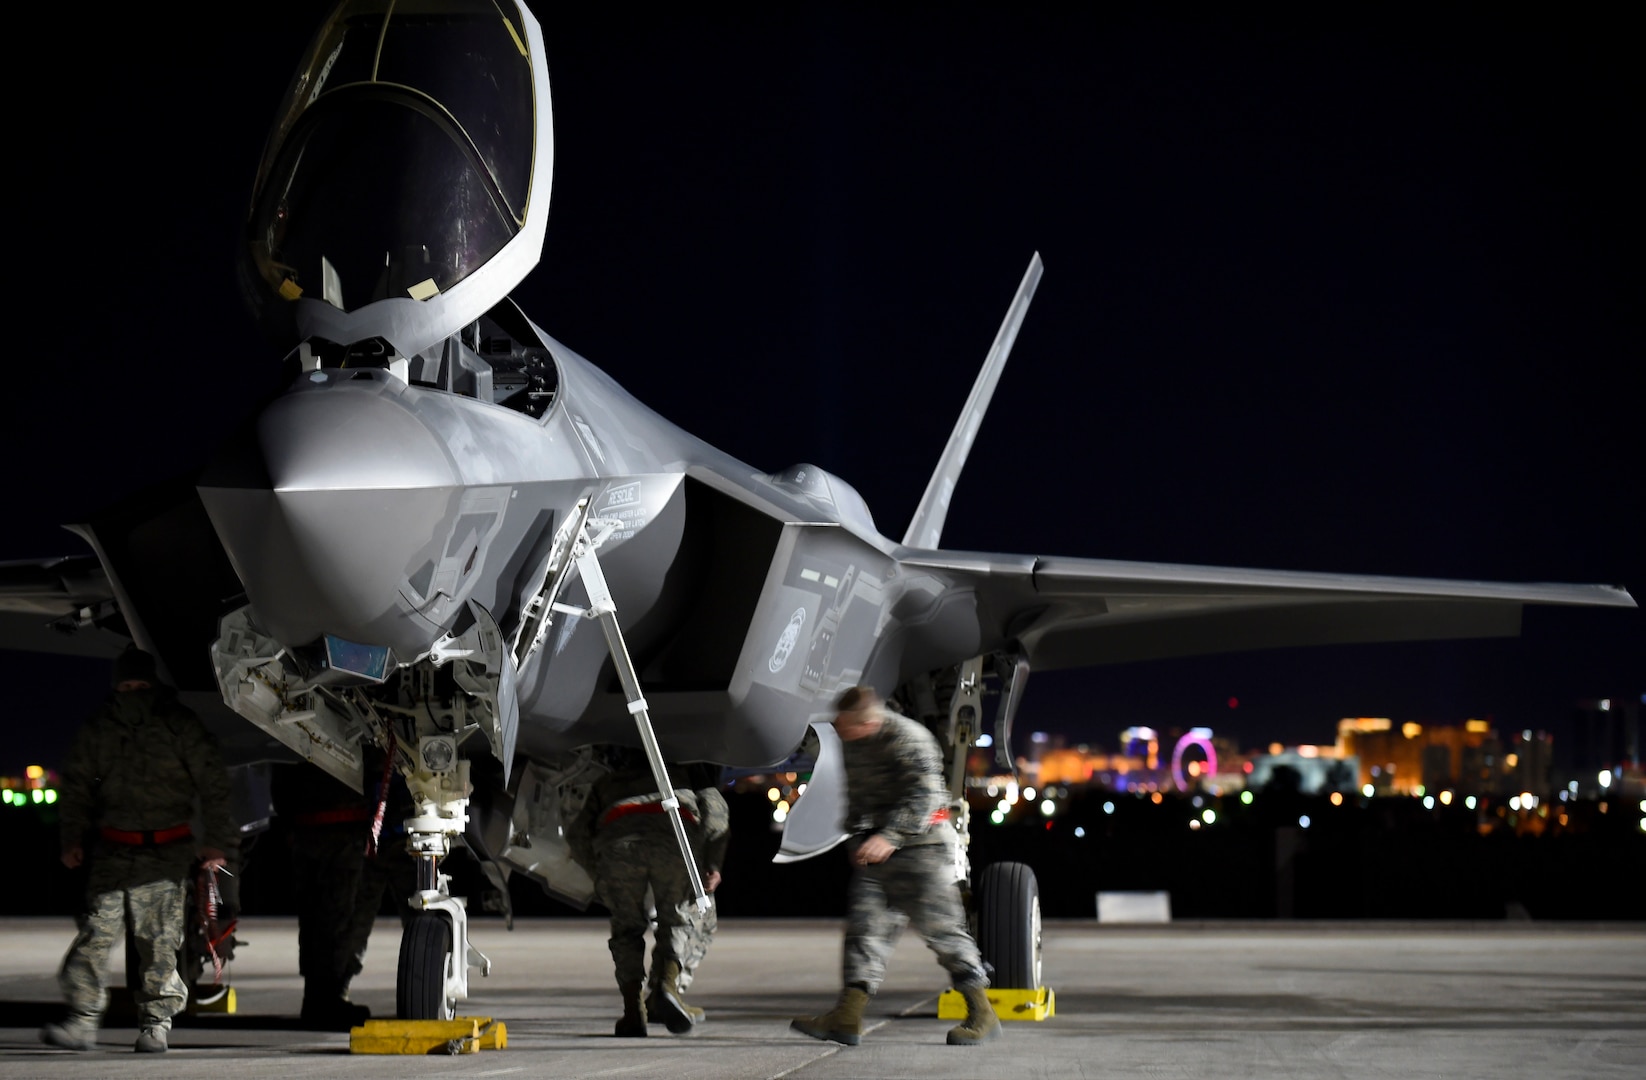 Maintainers from the 419th and 388th Fighter Wings conduct conducts preflight checks on an F-35A Lightning II from Hill Air Force Base, Utah, during Red Flag 17-1 at Nellis Air Force Base, Nev., Jan. 24, 2017. Airmen from the active duty 388th FW and Air Force Reserve 419th FW fly and maintain the Lightning II in a total force partnership, capitalizing on the strength of both components. (U.S. Air Force photo by Staff Sgt. Natasha Stannard)